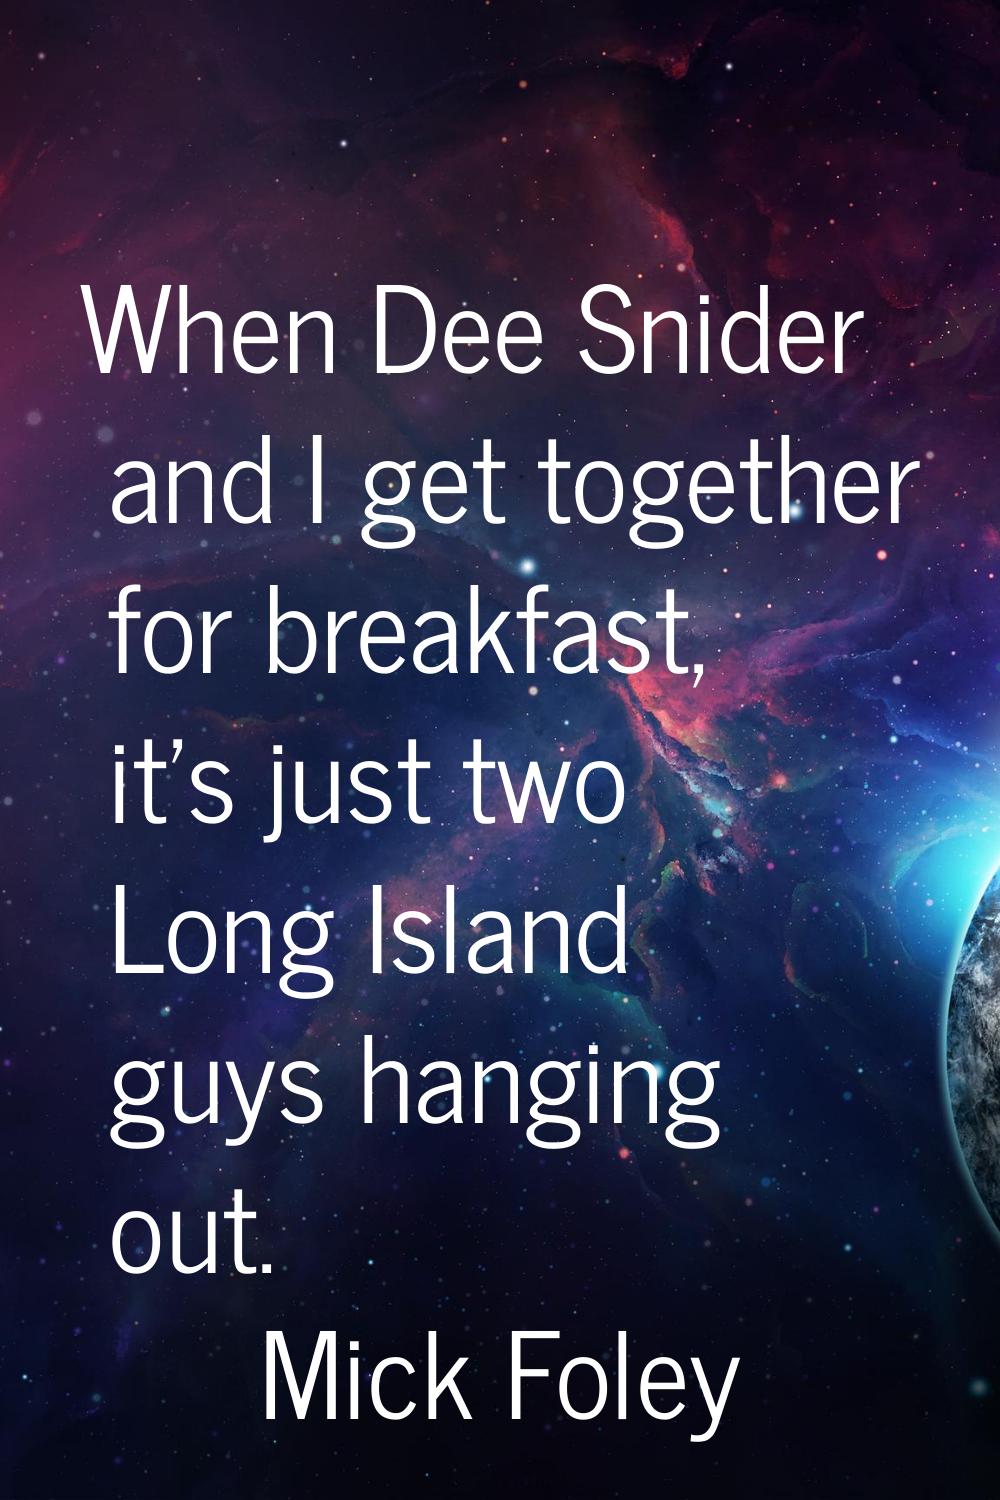 When Dee Snider and I get together for breakfast, it's just two Long Island guys hanging out.